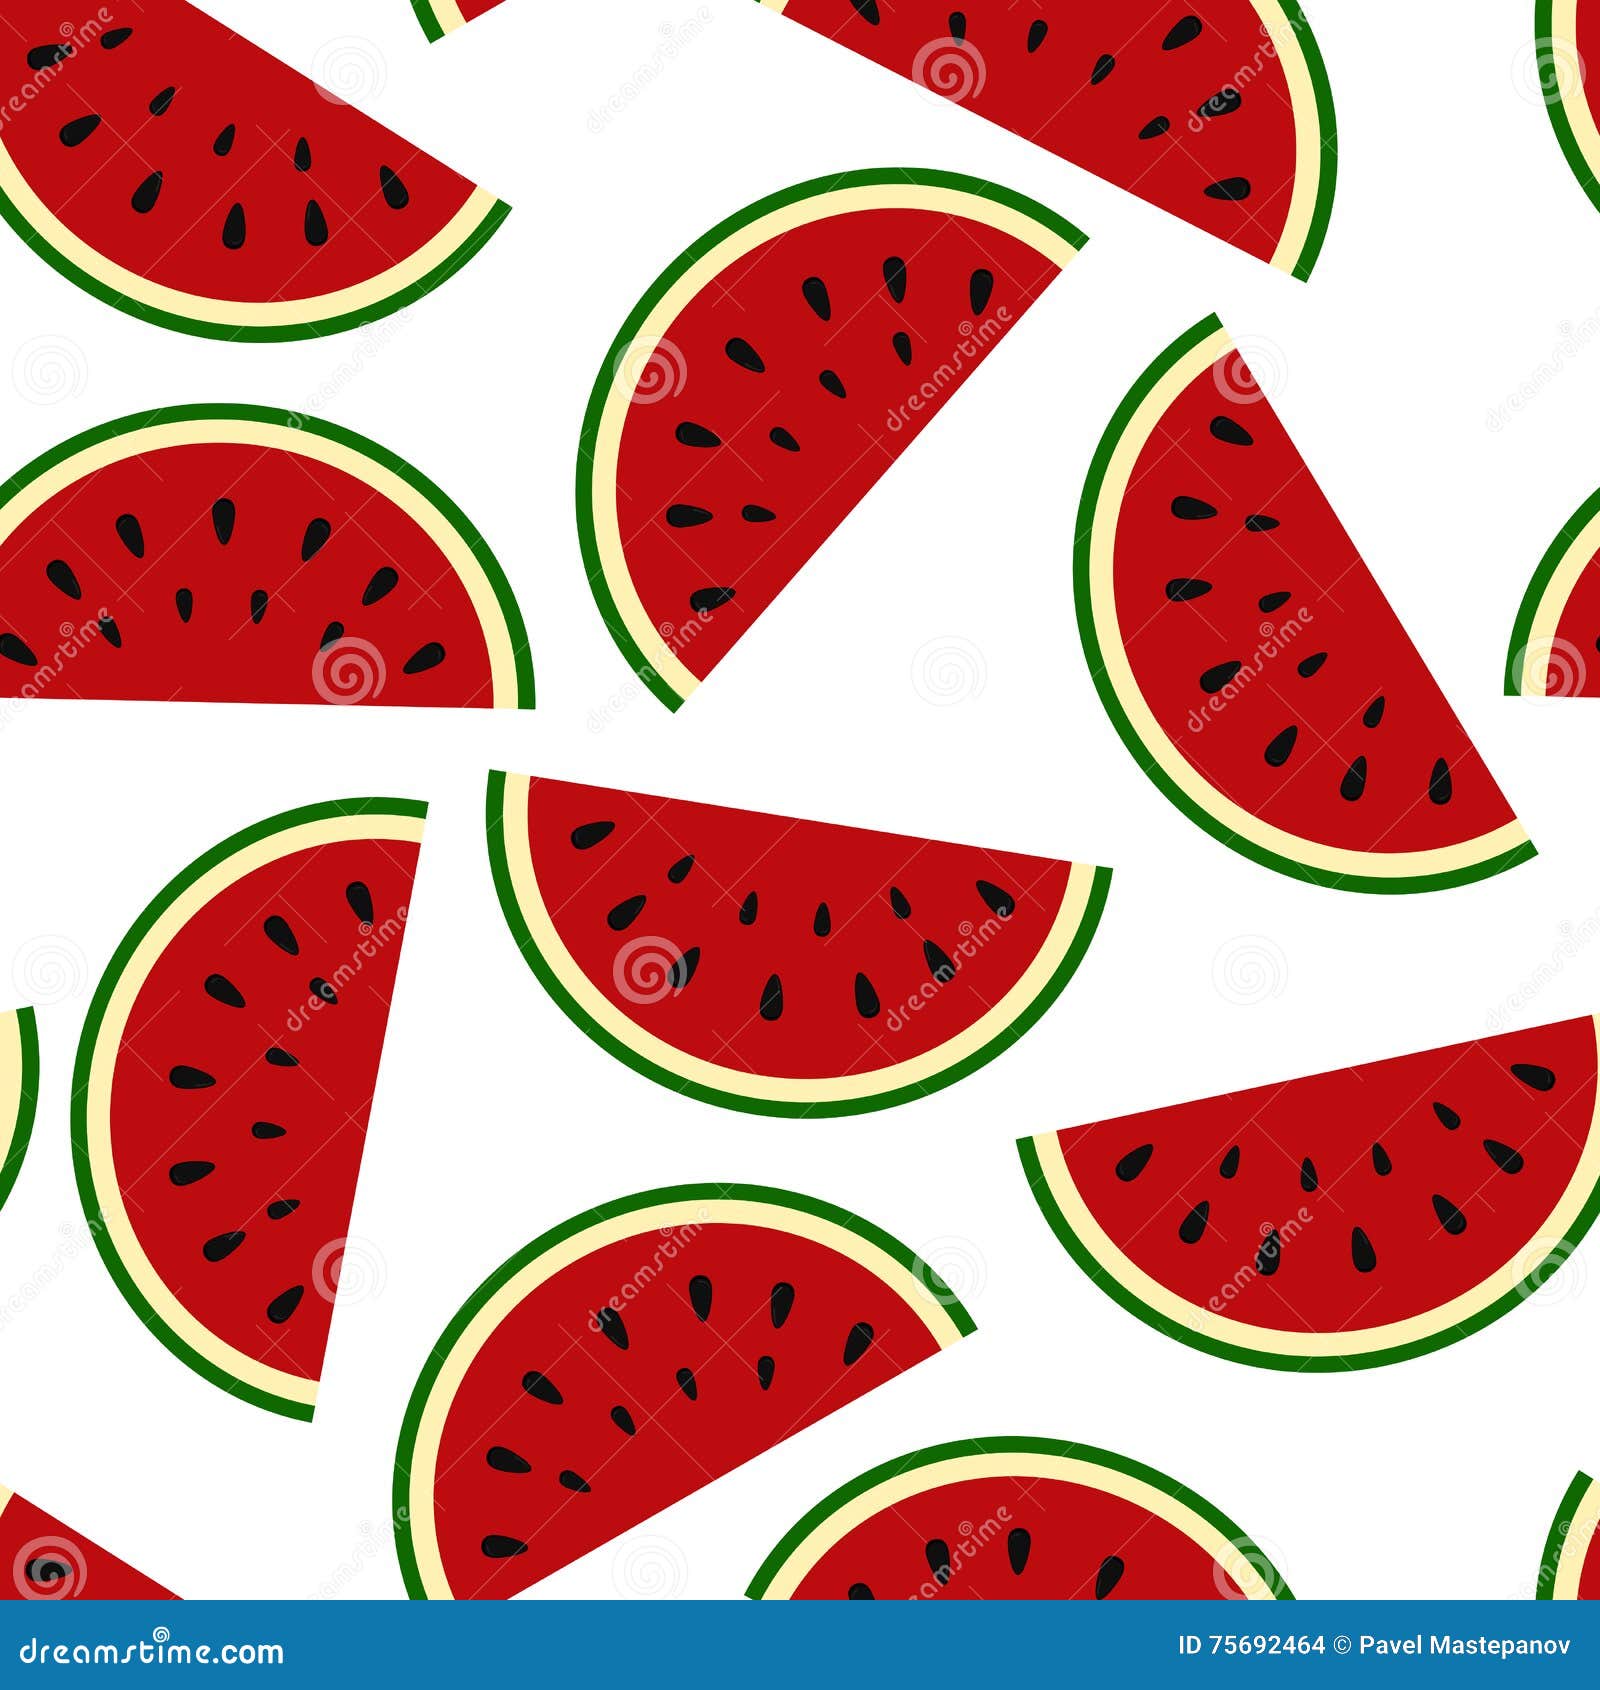 Summer Pink Cute Simple Watermelon Background Wallpaper Image For Free  Download  Pngtree